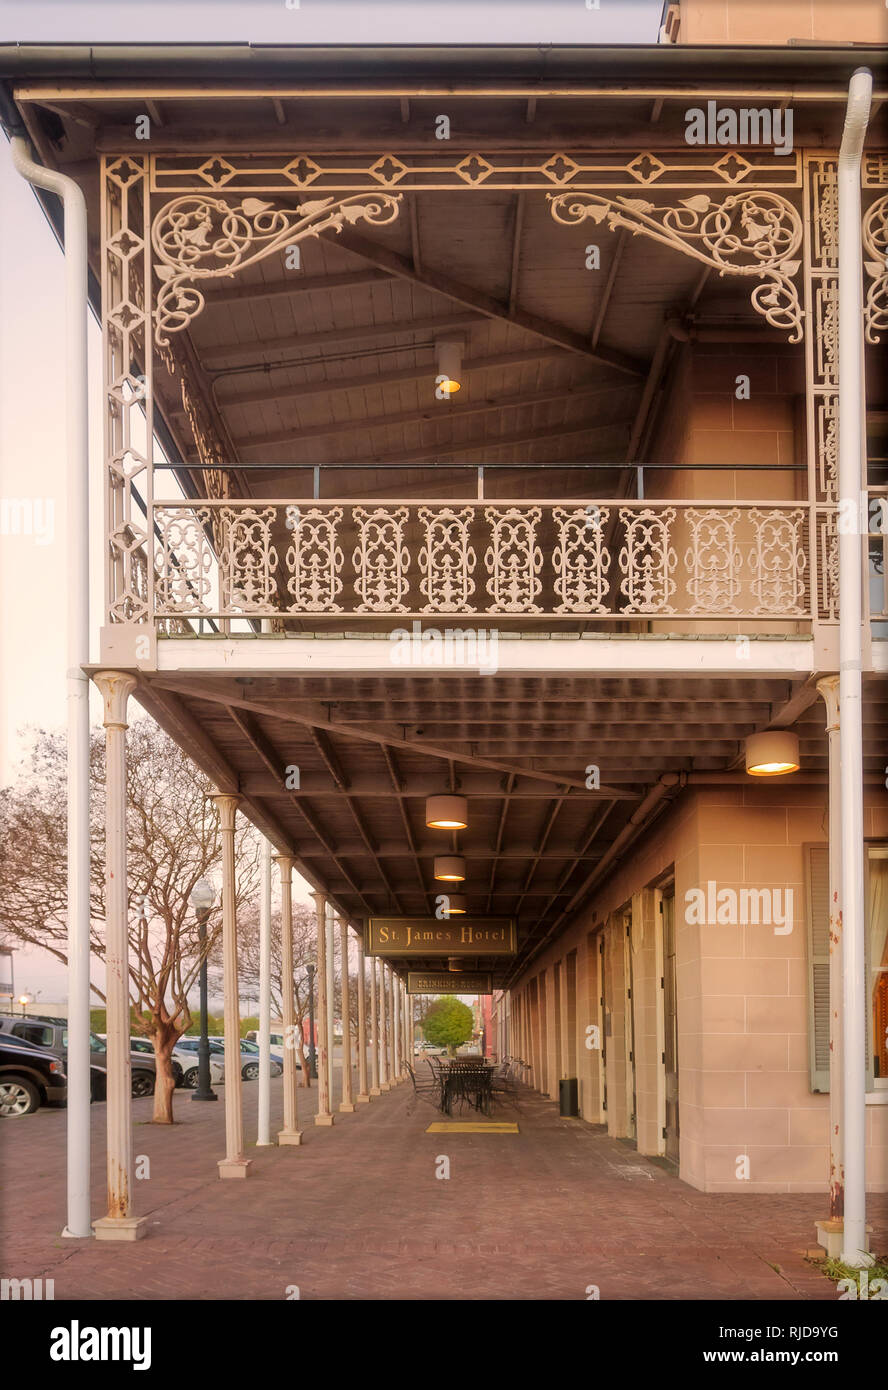 Intricate wrought iron adorns the balcony at the St. James Hotel, Feb. 14, 2015, in Selma, Alabama. The hotel was built in 1837. Stock Photo